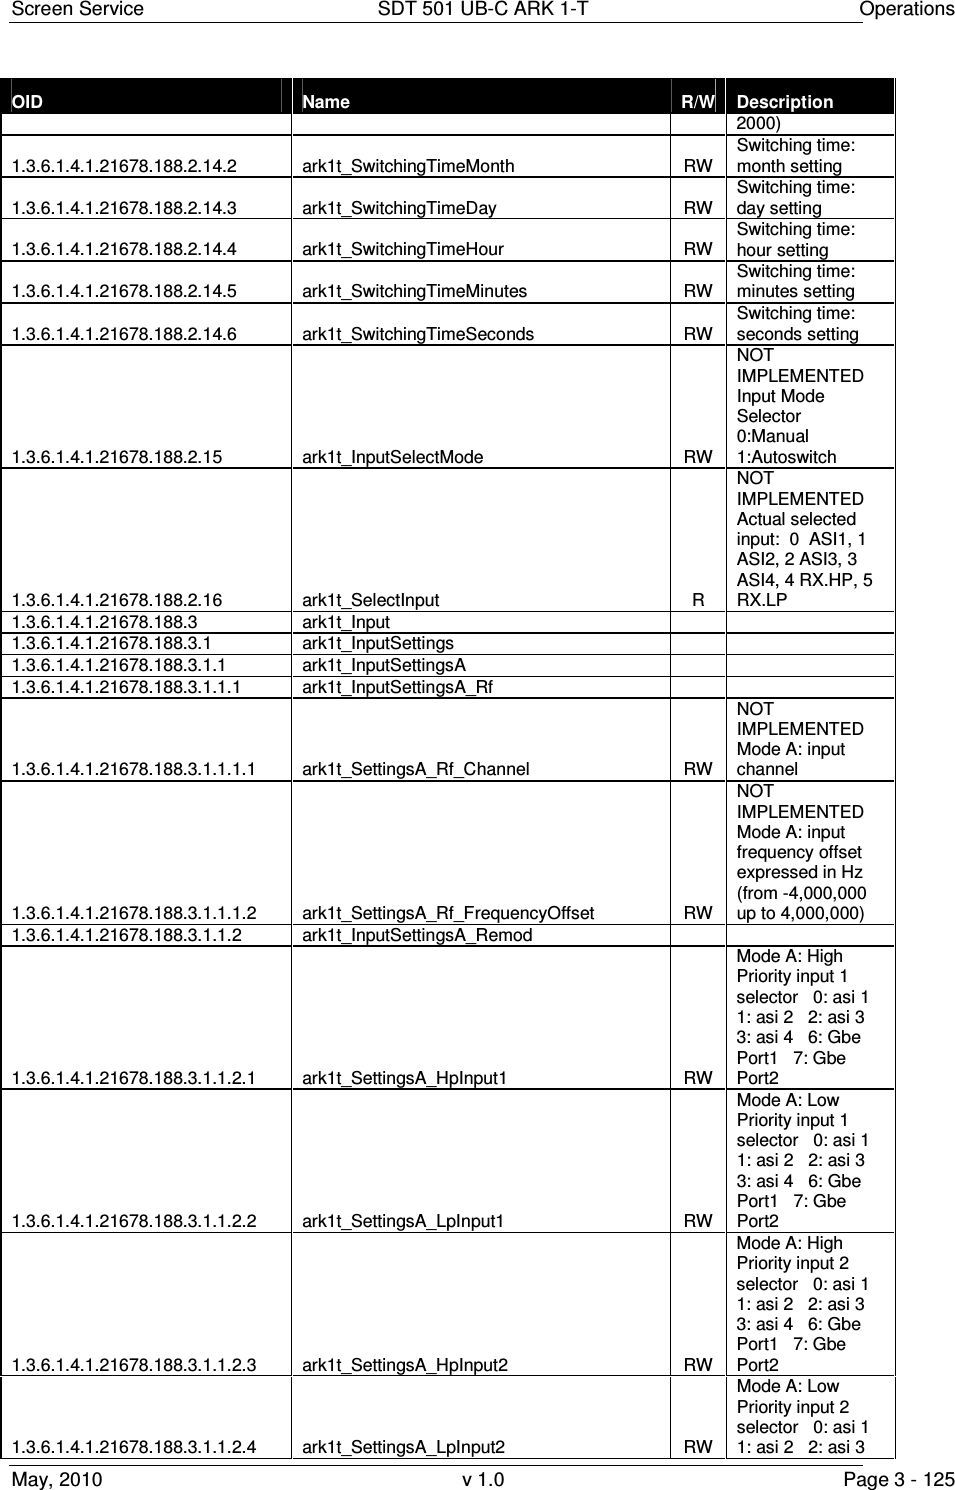 Screen Service  SDT 501 UB-C ARK 1-T  Operations May, 2010  v 1.0  Page 3 - 125 OID  Name  R/W  Description 2000) 1.3.6.1.4.1.21678.188.2.14.2  ark1t_SwitchingTimeMonth  RW Switching time: month setting 1.3.6.1.4.1.21678.188.2.14.3  ark1t_SwitchingTimeDay  RW Switching time: day setting 1.3.6.1.4.1.21678.188.2.14.4  ark1t_SwitchingTimeHour  RW Switching time: hour setting 1.3.6.1.4.1.21678.188.2.14.5  ark1t_SwitchingTimeMinutes  RW Switching time: minutes setting 1.3.6.1.4.1.21678.188.2.14.6  ark1t_SwitchingTimeSeconds  RW Switching time: seconds setting 1.3.6.1.4.1.21678.188.2.15  ark1t_InputSelectMode  RW NOT IMPLEMENTED  Input Mode Selector   0:Manual  1:Autoswitch 1.3.6.1.4.1.21678.188.2.16  ark1t_SelectInput  R NOT IMPLEMENTED  Actual selected input:  0  ASI1, 1 ASI2, 2 ASI3, 3 ASI4, 4 RX.HP, 5 RX.LP 1.3.6.1.4.1.21678.188.3  ark1t_Input      1.3.6.1.4.1.21678.188.3.1  ark1t_InputSettings      1.3.6.1.4.1.21678.188.3.1.1  ark1t_InputSettingsA      1.3.6.1.4.1.21678.188.3.1.1.1  ark1t_InputSettingsA_Rf      1.3.6.1.4.1.21678.188.3.1.1.1.1  ark1t_SettingsA_Rf_Channel  RW NOT IMPLEMENTED Mode A: input channel 1.3.6.1.4.1.21678.188.3.1.1.1.2  ark1t_SettingsA_Rf_FrequencyOffset  RW NOT IMPLEMENTED Mode A: input frequency offset expressed in Hz (from -4,000,000 up to 4,000,000) 1.3.6.1.4.1.21678.188.3.1.1.2  ark1t_InputSettingsA_Remod      1.3.6.1.4.1.21678.188.3.1.1.2.1  ark1t_SettingsA_HpInput1  RW Mode A: High Priority input 1 selector   0: asi 1   1: asi 2   2: asi 3   3: asi 4   6: Gbe Port1   7: Gbe Port2 1.3.6.1.4.1.21678.188.3.1.1.2.2  ark1t_SettingsA_LpInput1  RW Mode A: Low Priority input 1 selector   0: asi 1   1: asi 2   2: asi 3   3: asi 4   6: Gbe Port1   7: Gbe Port2 1.3.6.1.4.1.21678.188.3.1.1.2.3  ark1t_SettingsA_HpInput2  RW Mode A: High Priority input 2 selector   0: asi 1   1: asi 2   2: asi 3   3: asi 4   6: Gbe Port1   7: Gbe Port2 1.3.6.1.4.1.21678.188.3.1.1.2.4  ark1t_SettingsA_LpInput2  RW Mode A: Low Priority input 2 selector   0: asi 1   1: asi 2   2: asi 3   